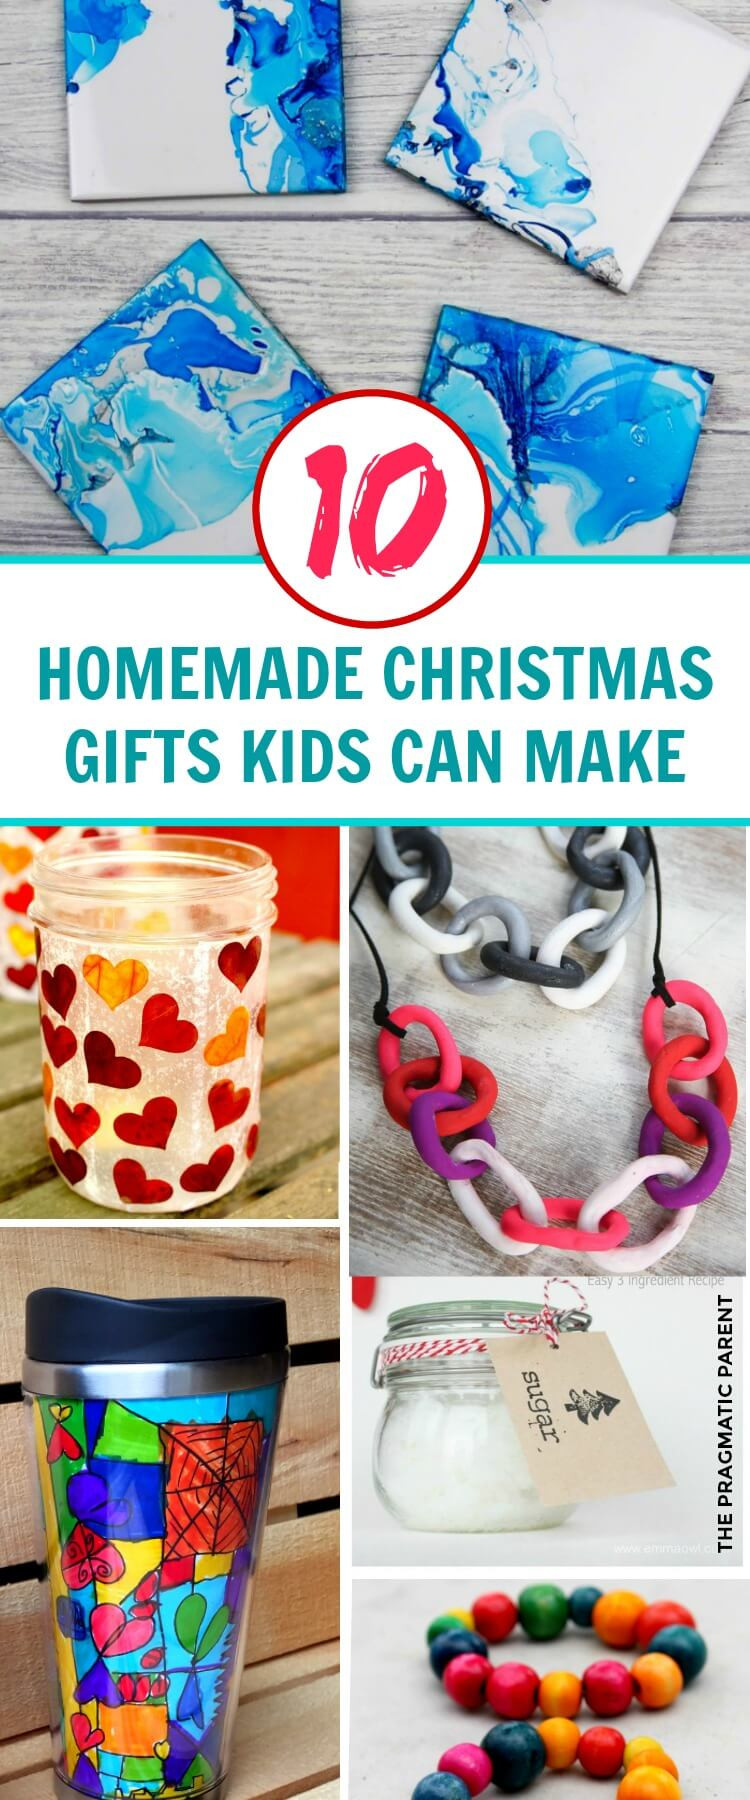 Homemade Gifts For Children
 10 Beautiful Homemade Christmas Gifts Kids Can Make This 2020